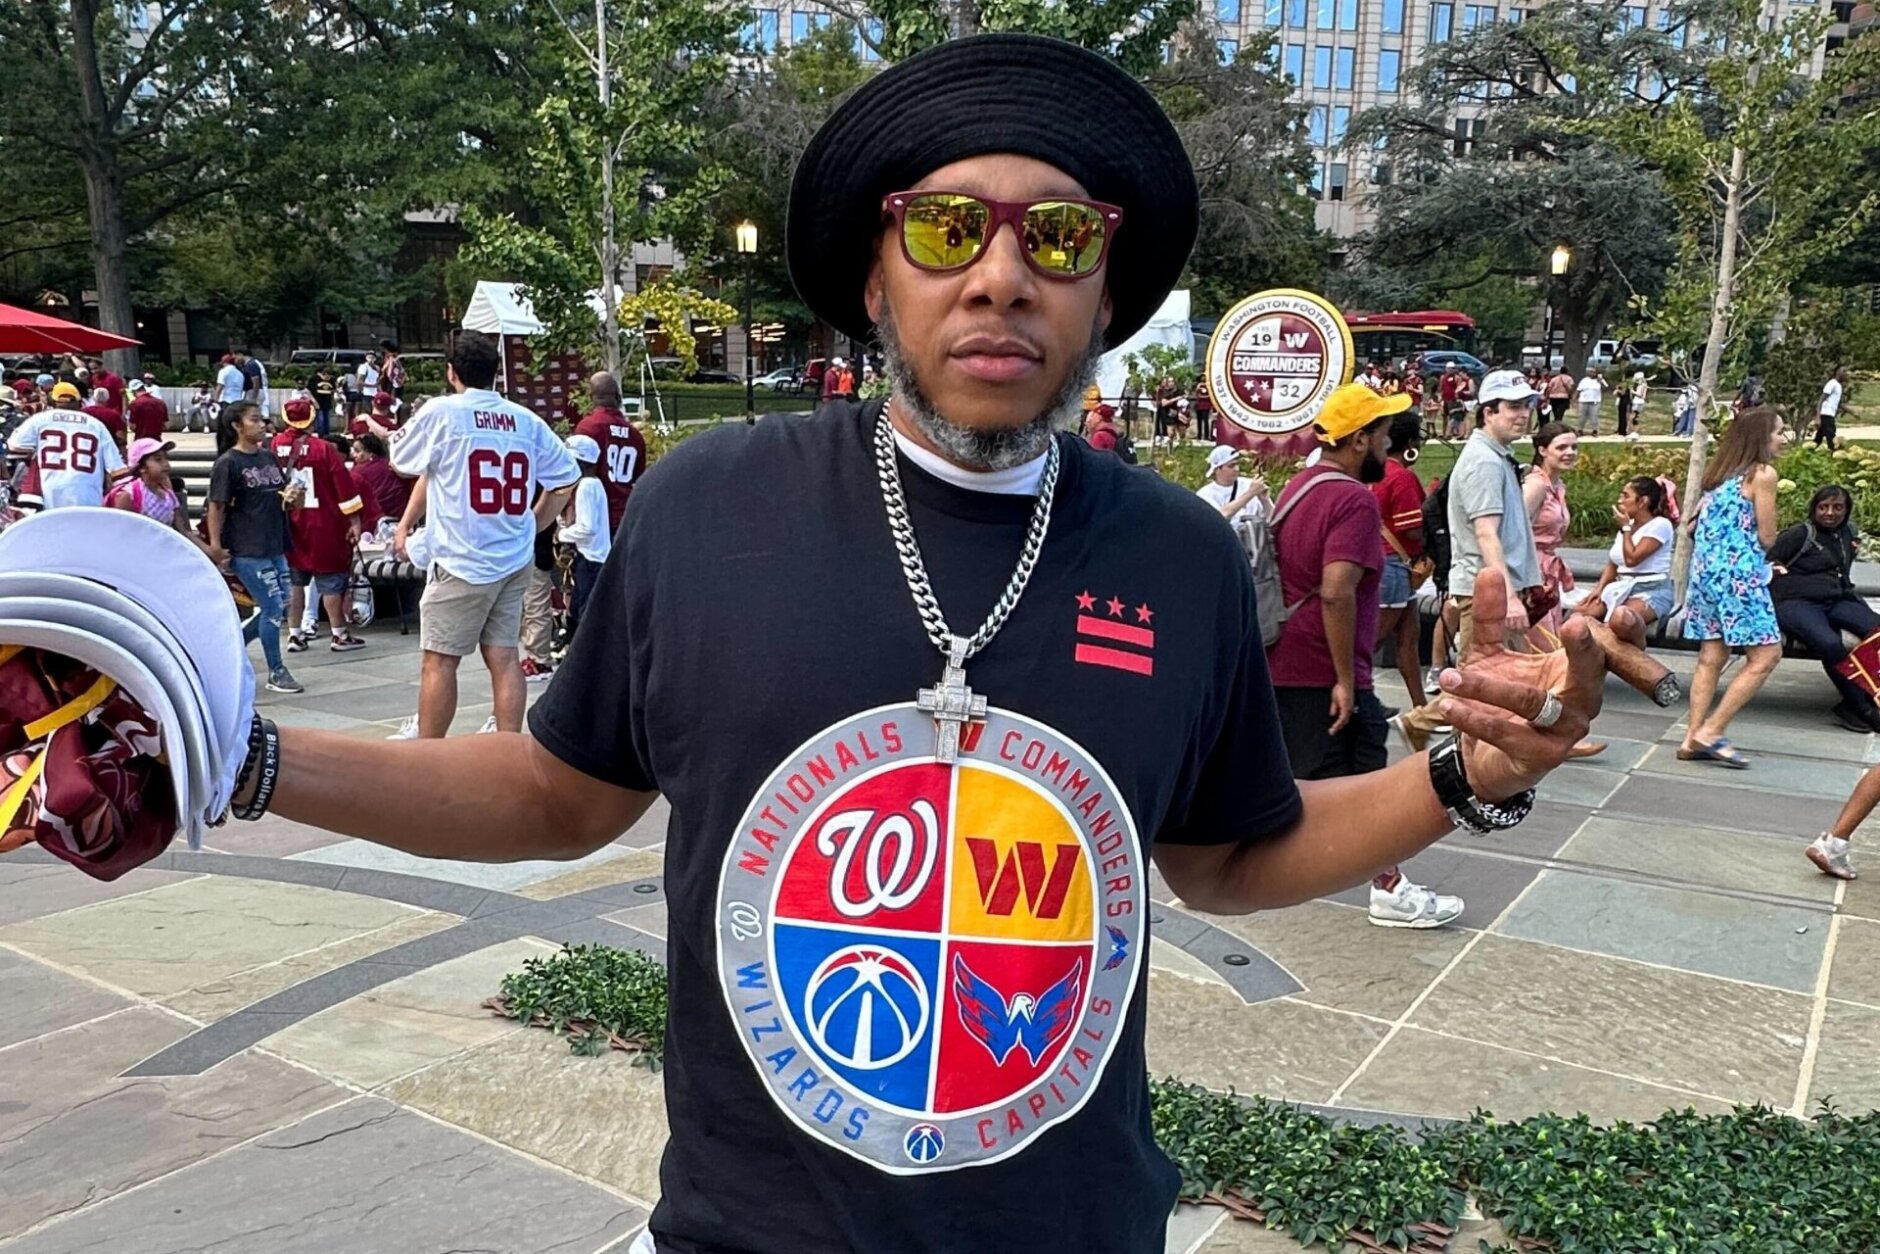 <p>Eric Pryor said he’s happy to see the fan base reinvigorated.</p>
<p>He said there were way more fans at this year’s kick off than last year’s, and he’s excited about that.</p>
